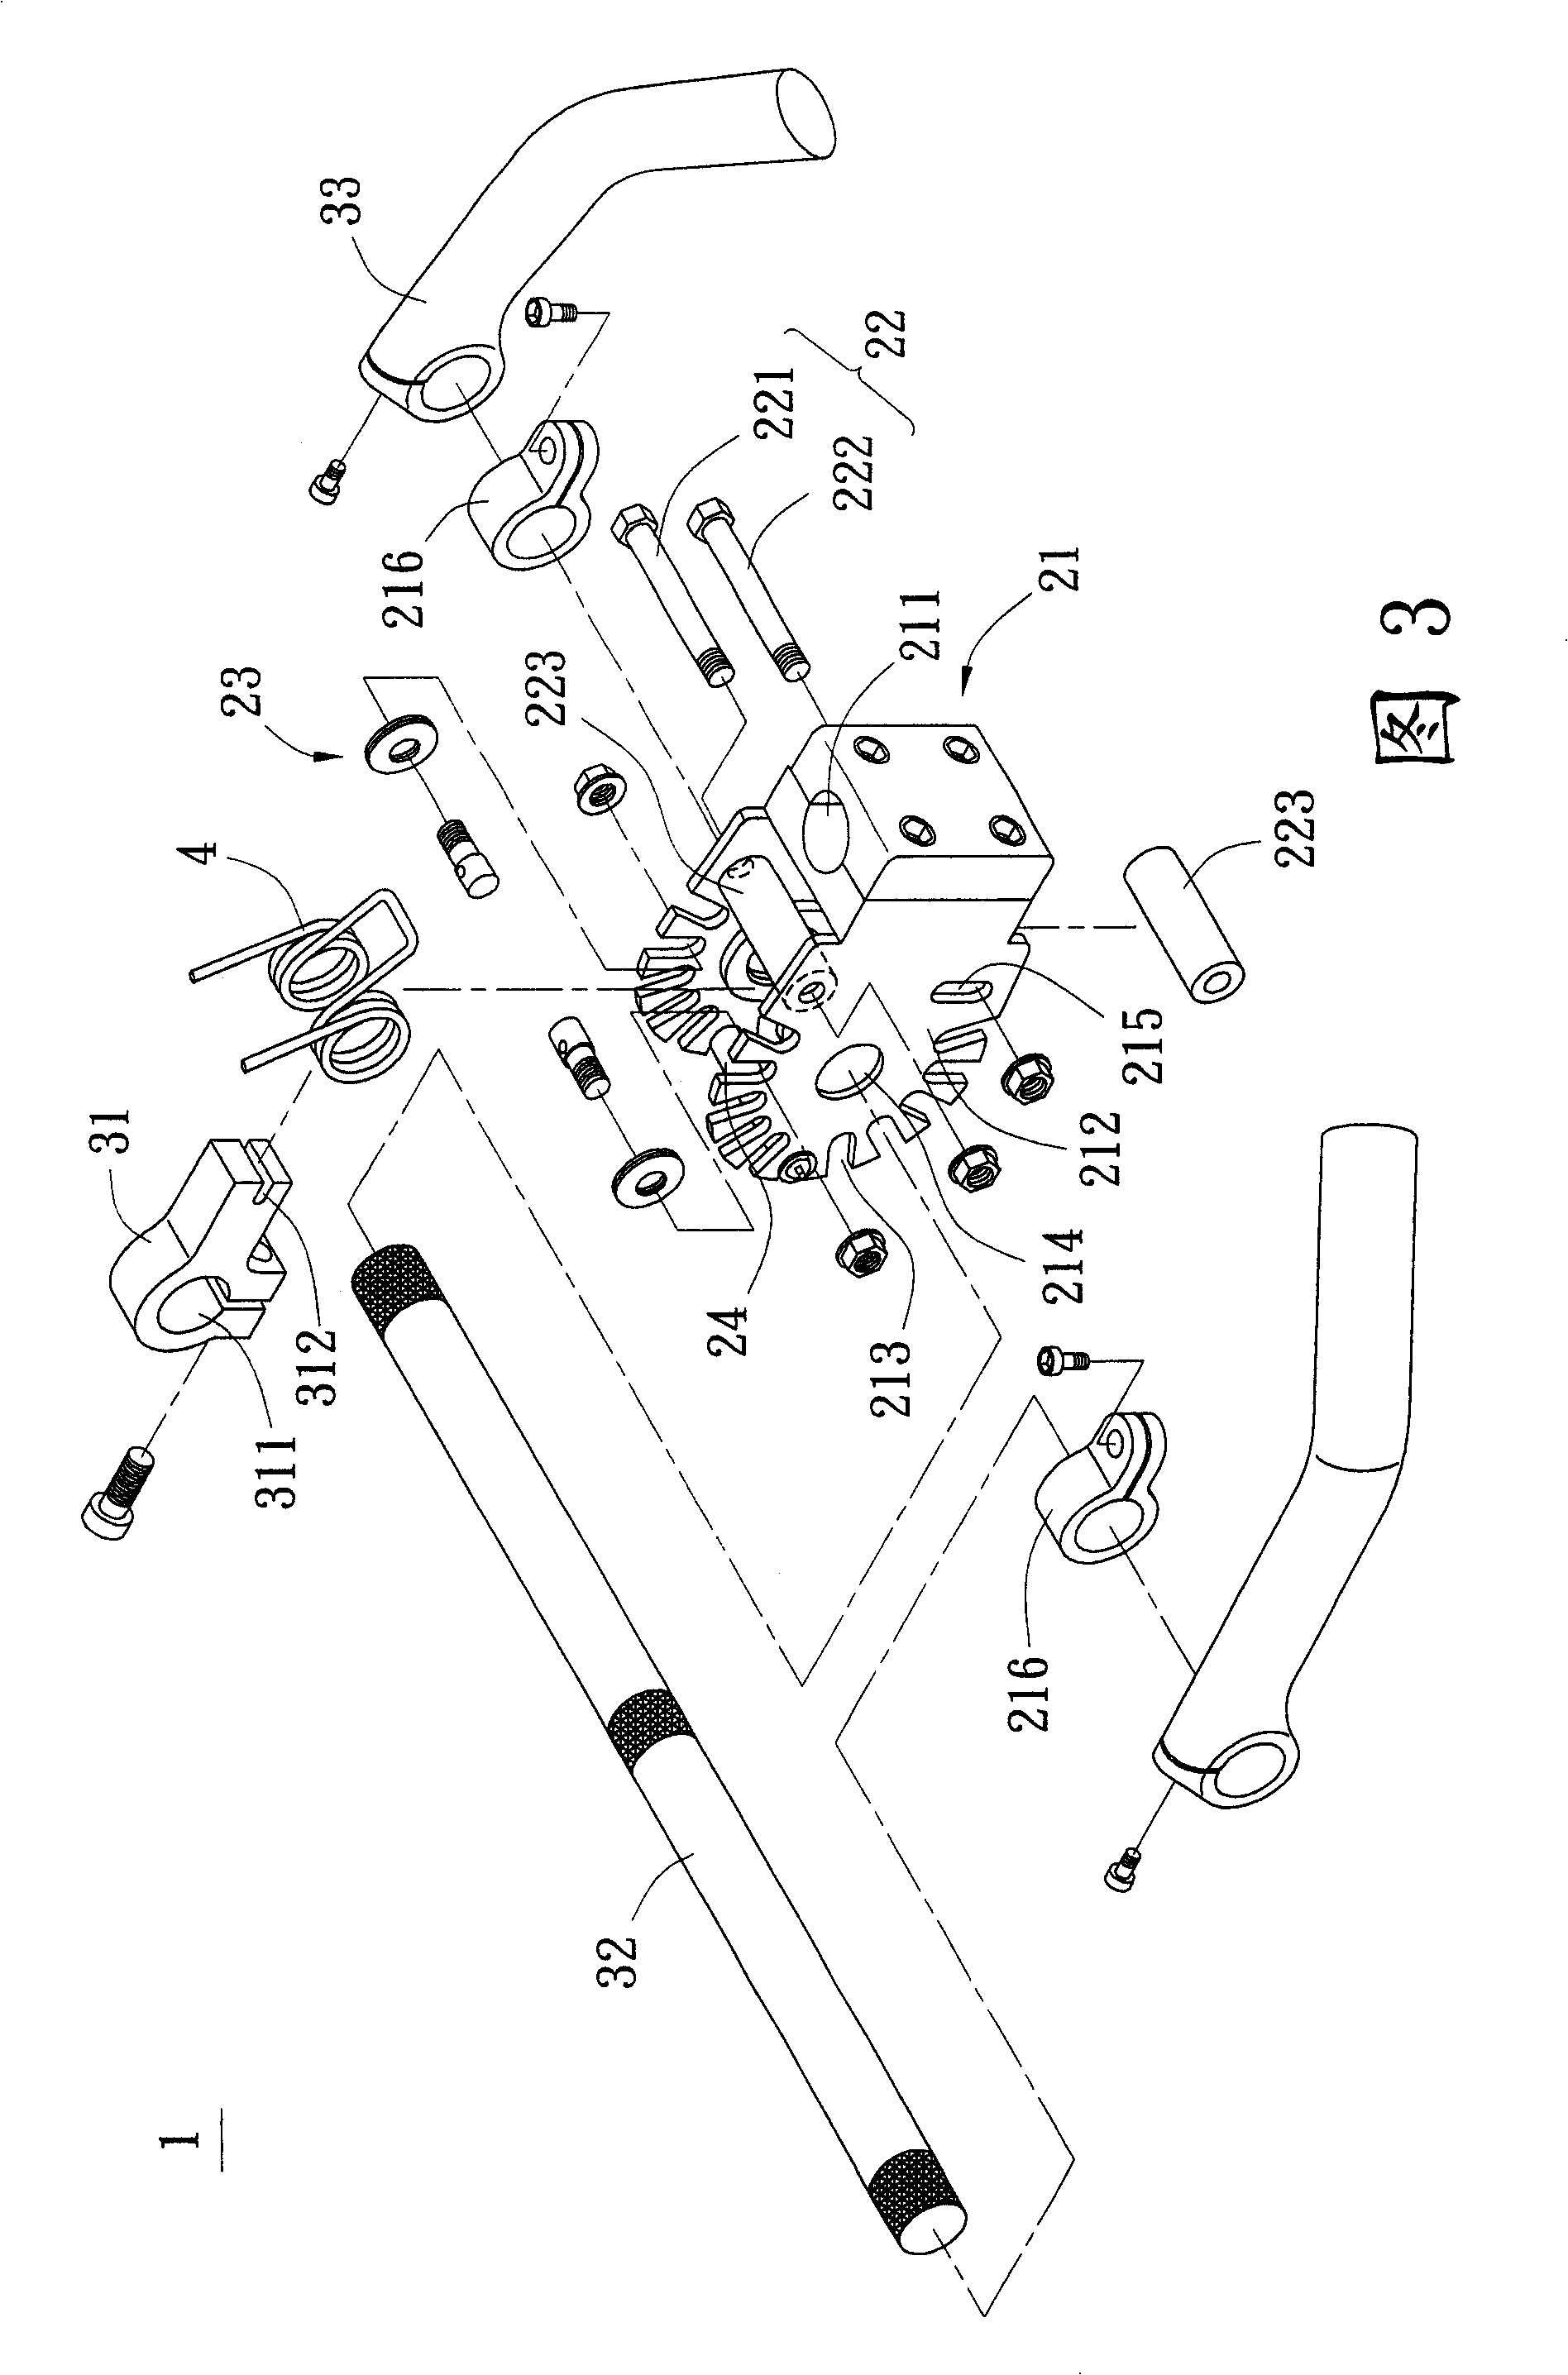 Anti-vibration system and device for bicycle steering tube